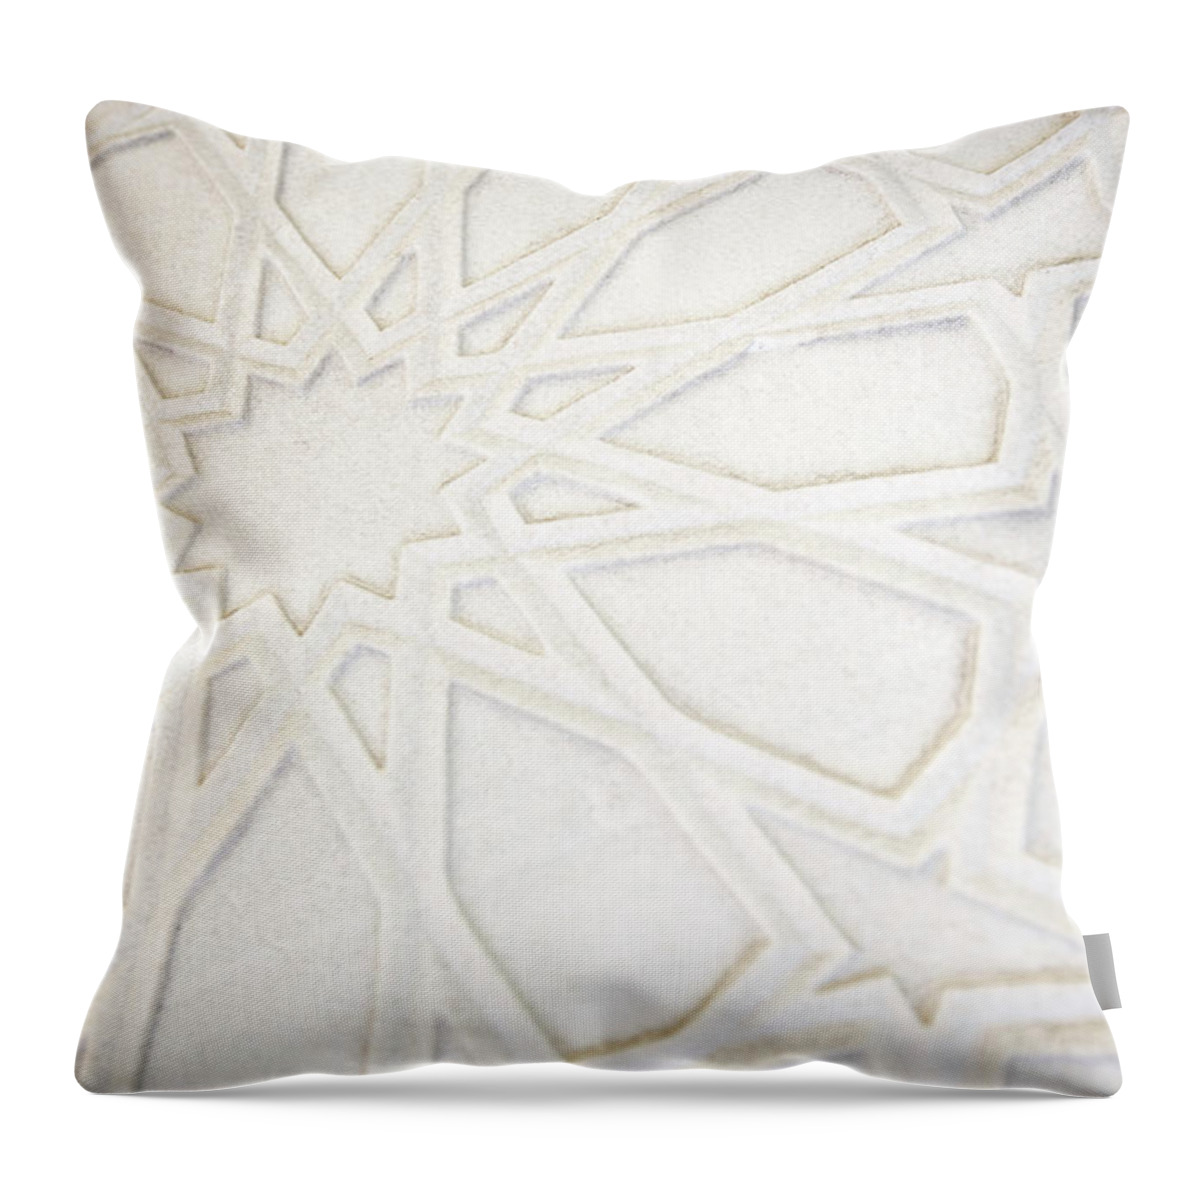 Marble Throw Pillow featuring the photograph Full Frame Islamic Pattern White Marble by Peskymonkey